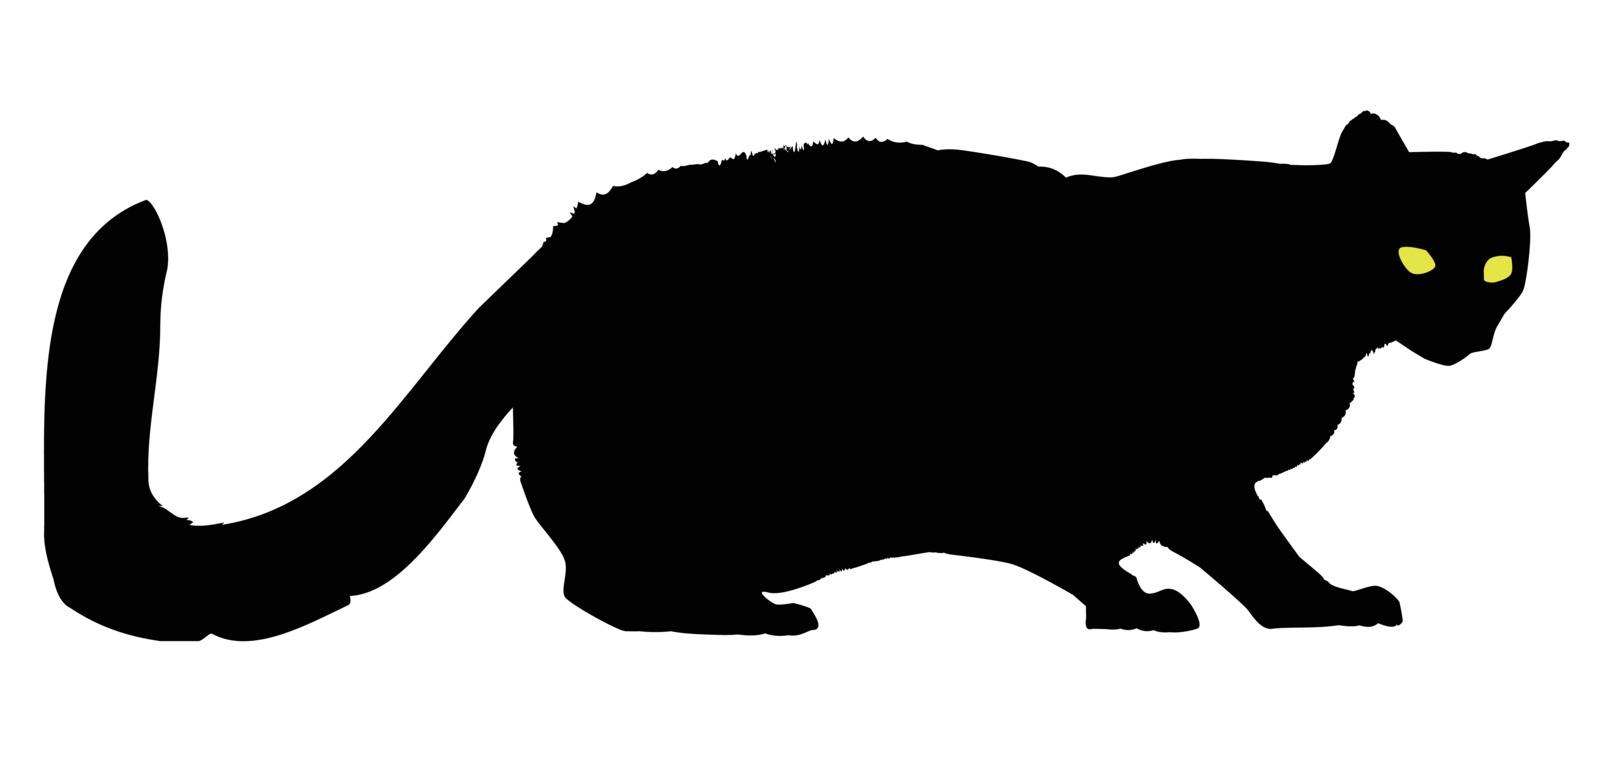 The silhouette of a cat with yellow eyes isolayed over a white background.